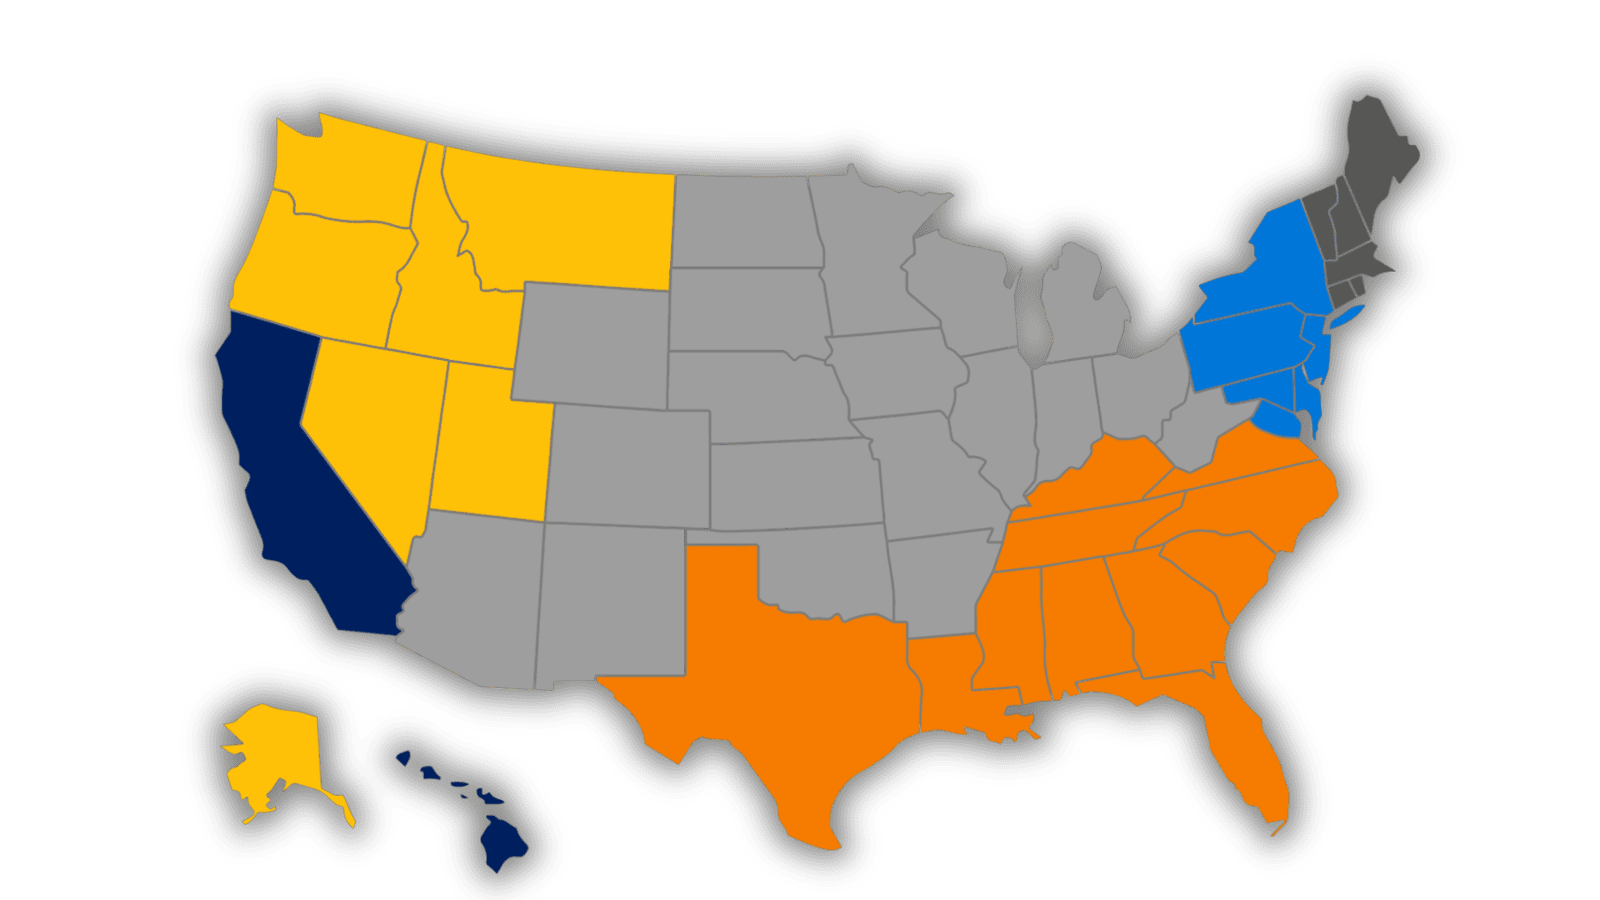 MAP of the USA with states highlighted according to accreditors